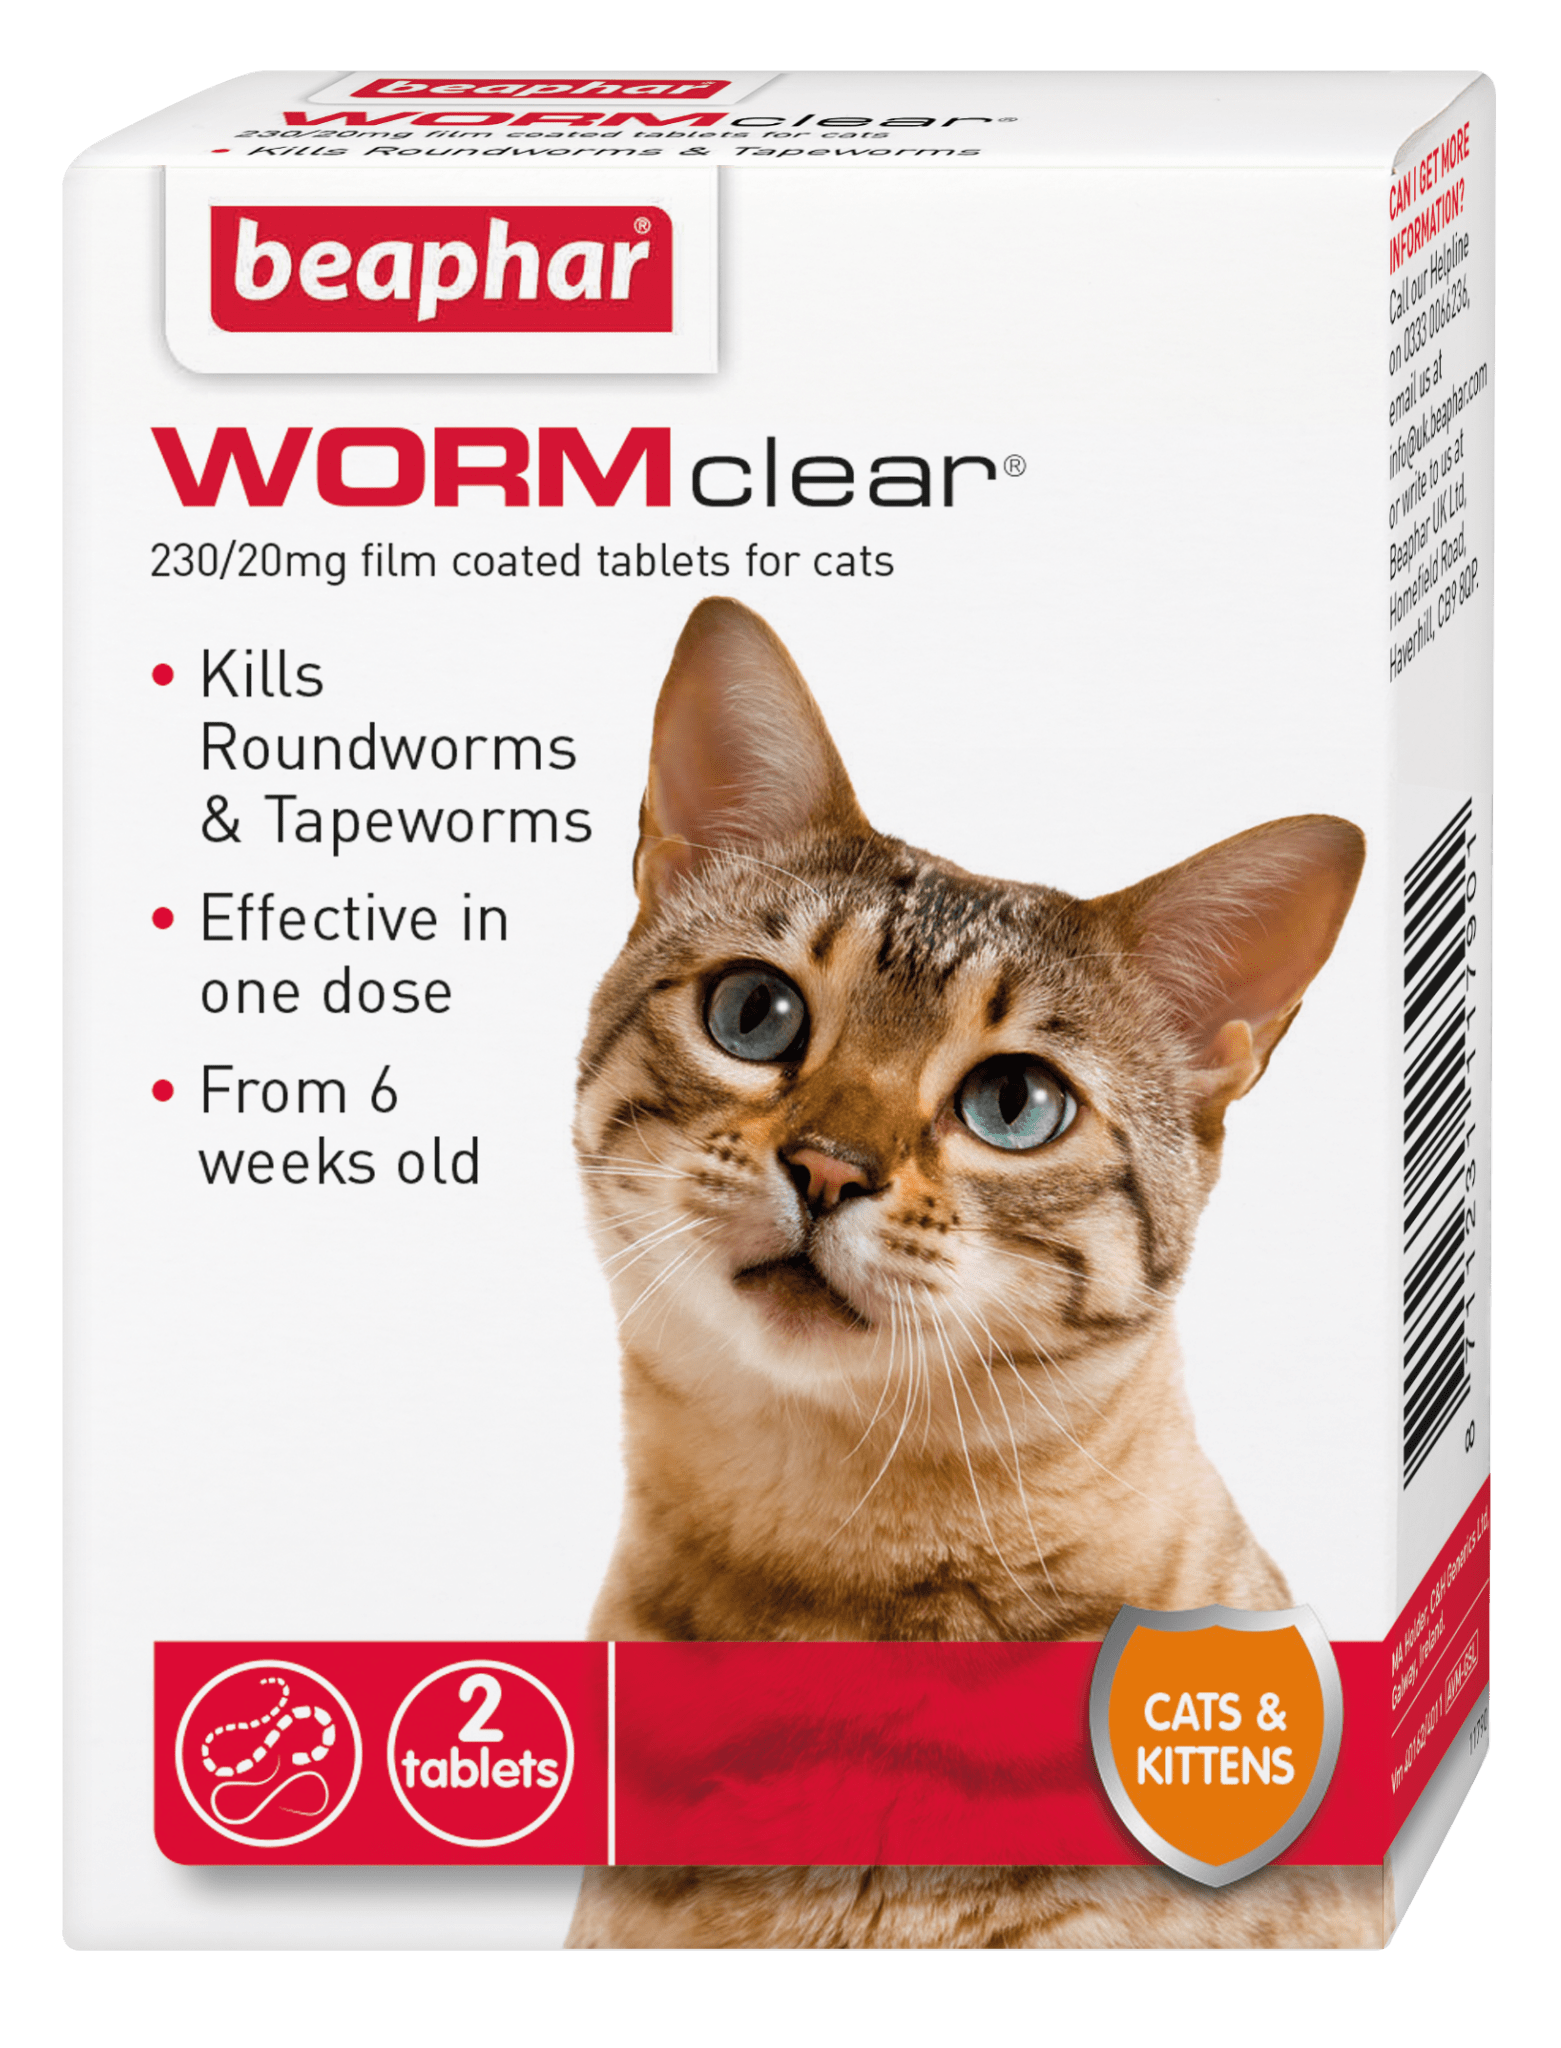 Beaphar WORMclear Worming Tablets for Cats (2 tablets x 6), Beaphar,